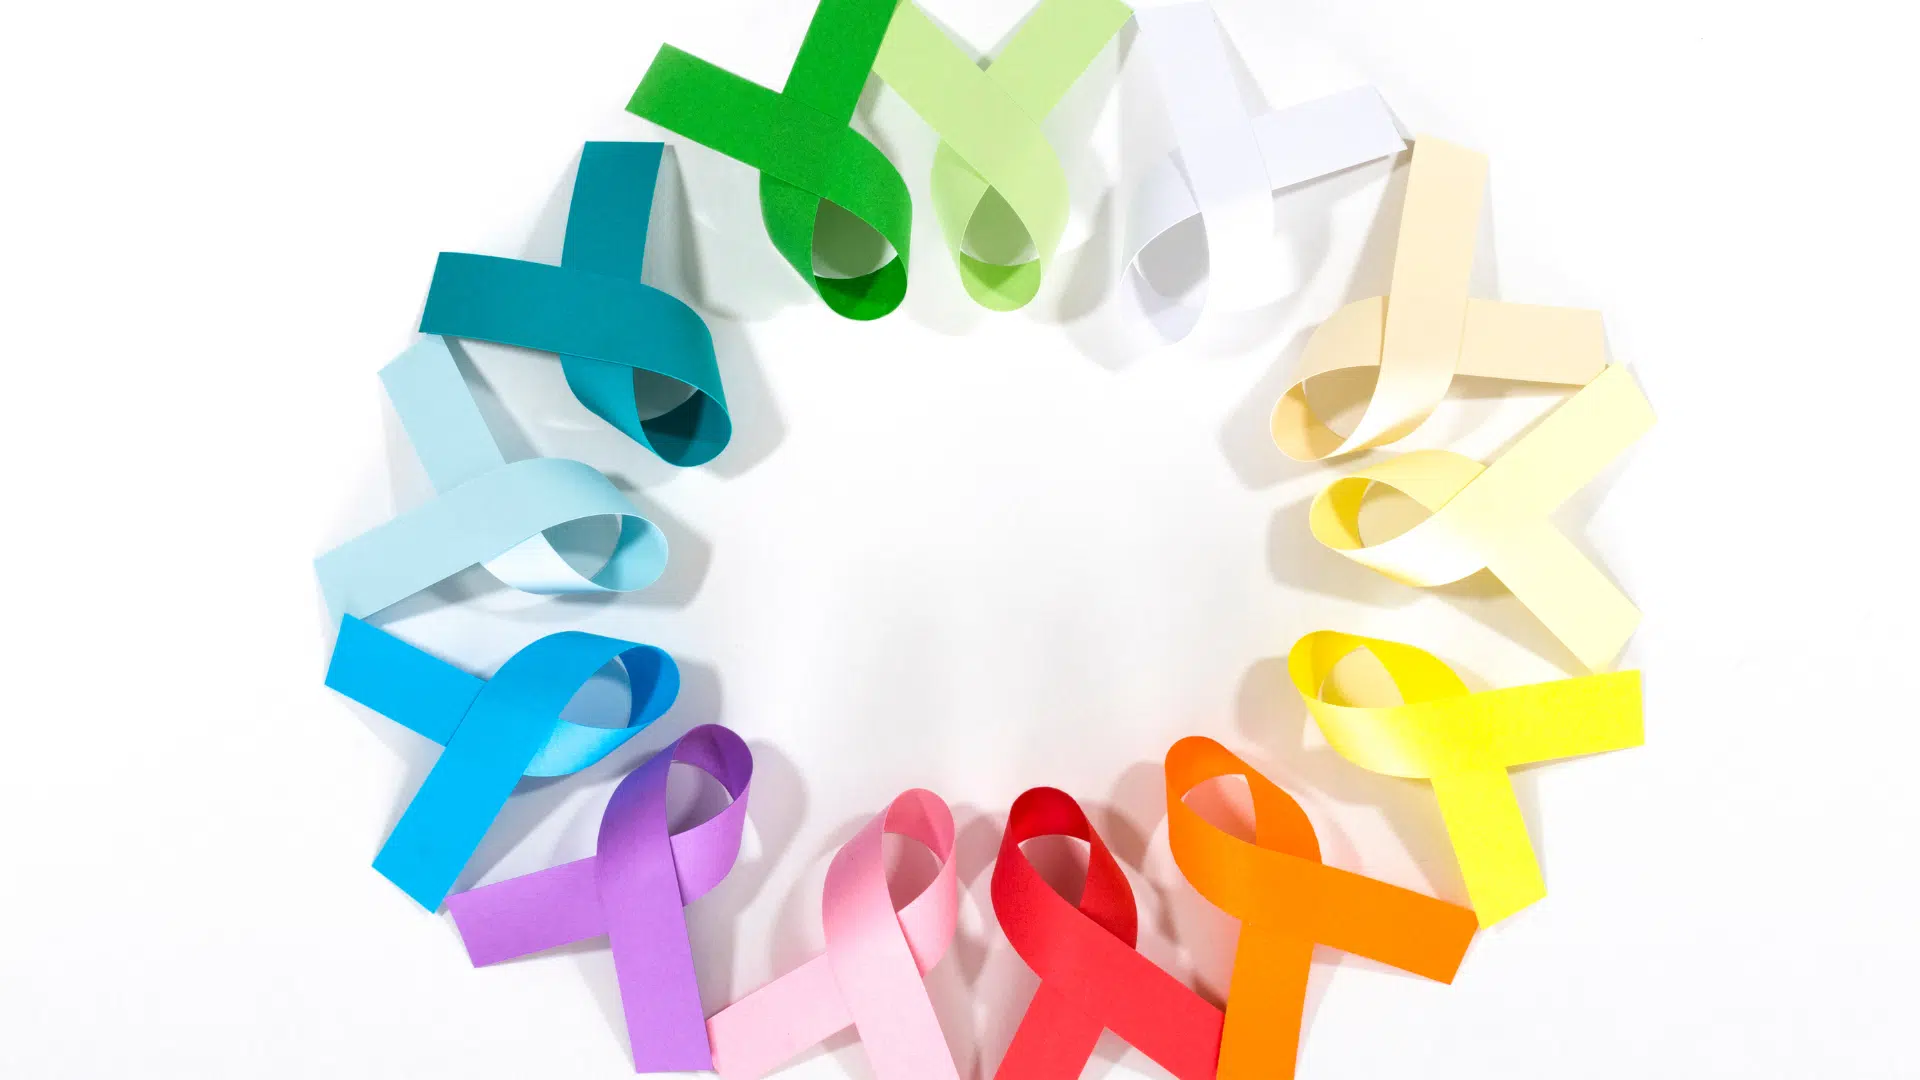 Photograph of cancer ribbons in a circle